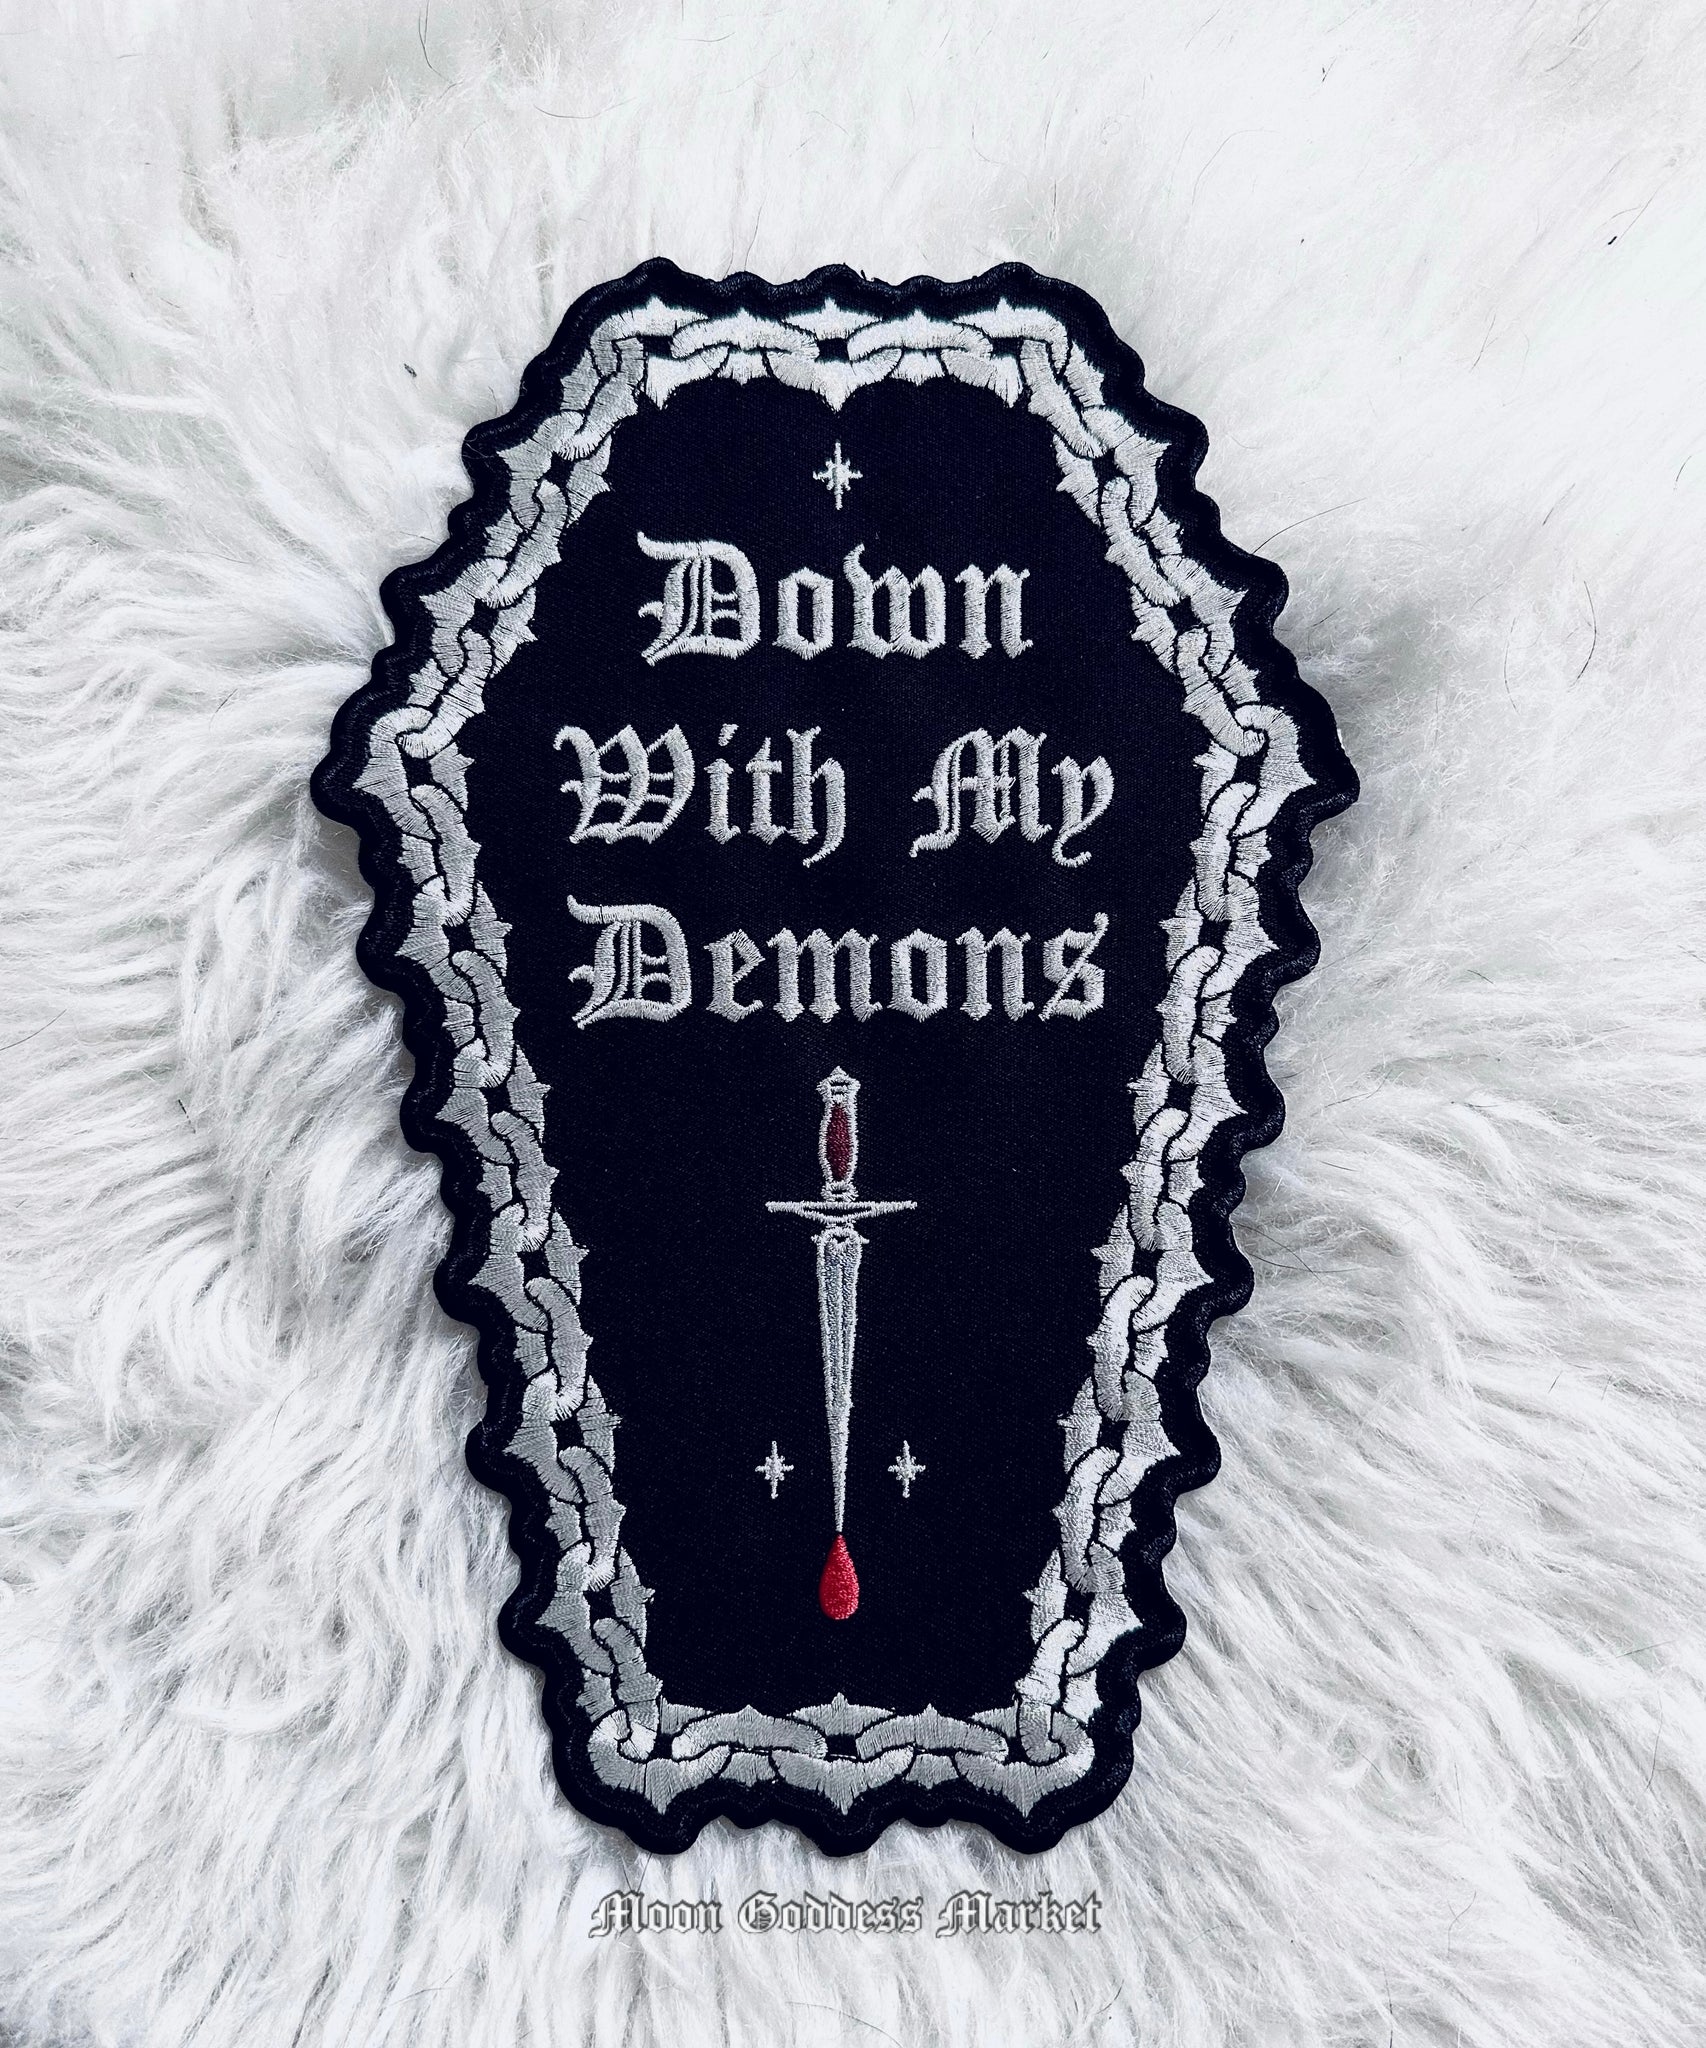 Down With My Demons XL Large Iron On Back Patch